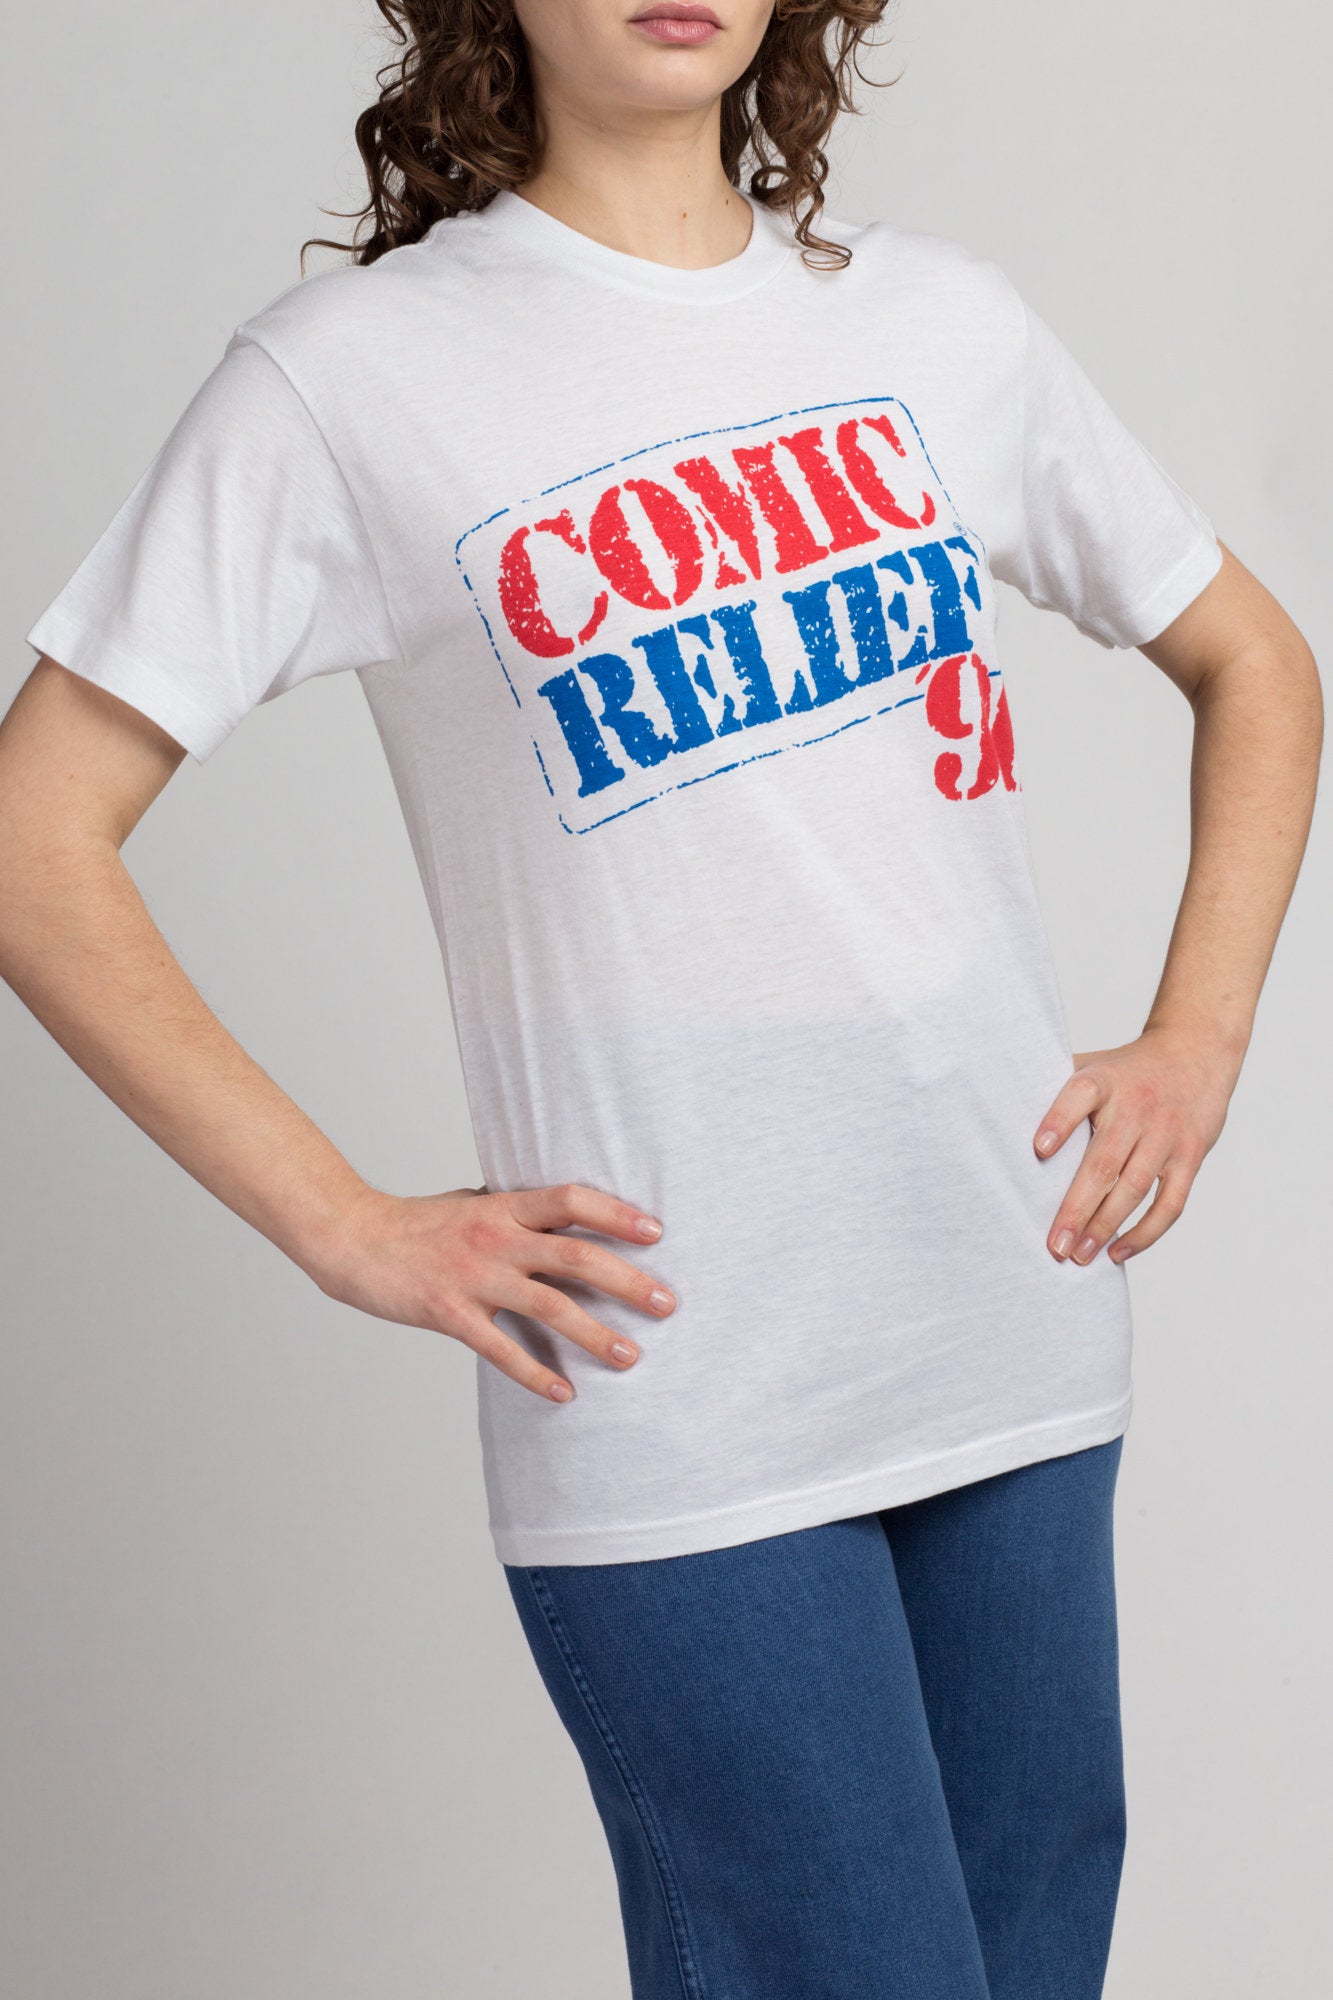 Vintage 1990 Comic Relief T Shirt - Medium to Large | 90s Radio City Music Hall NYC Comedian Graphic Tee